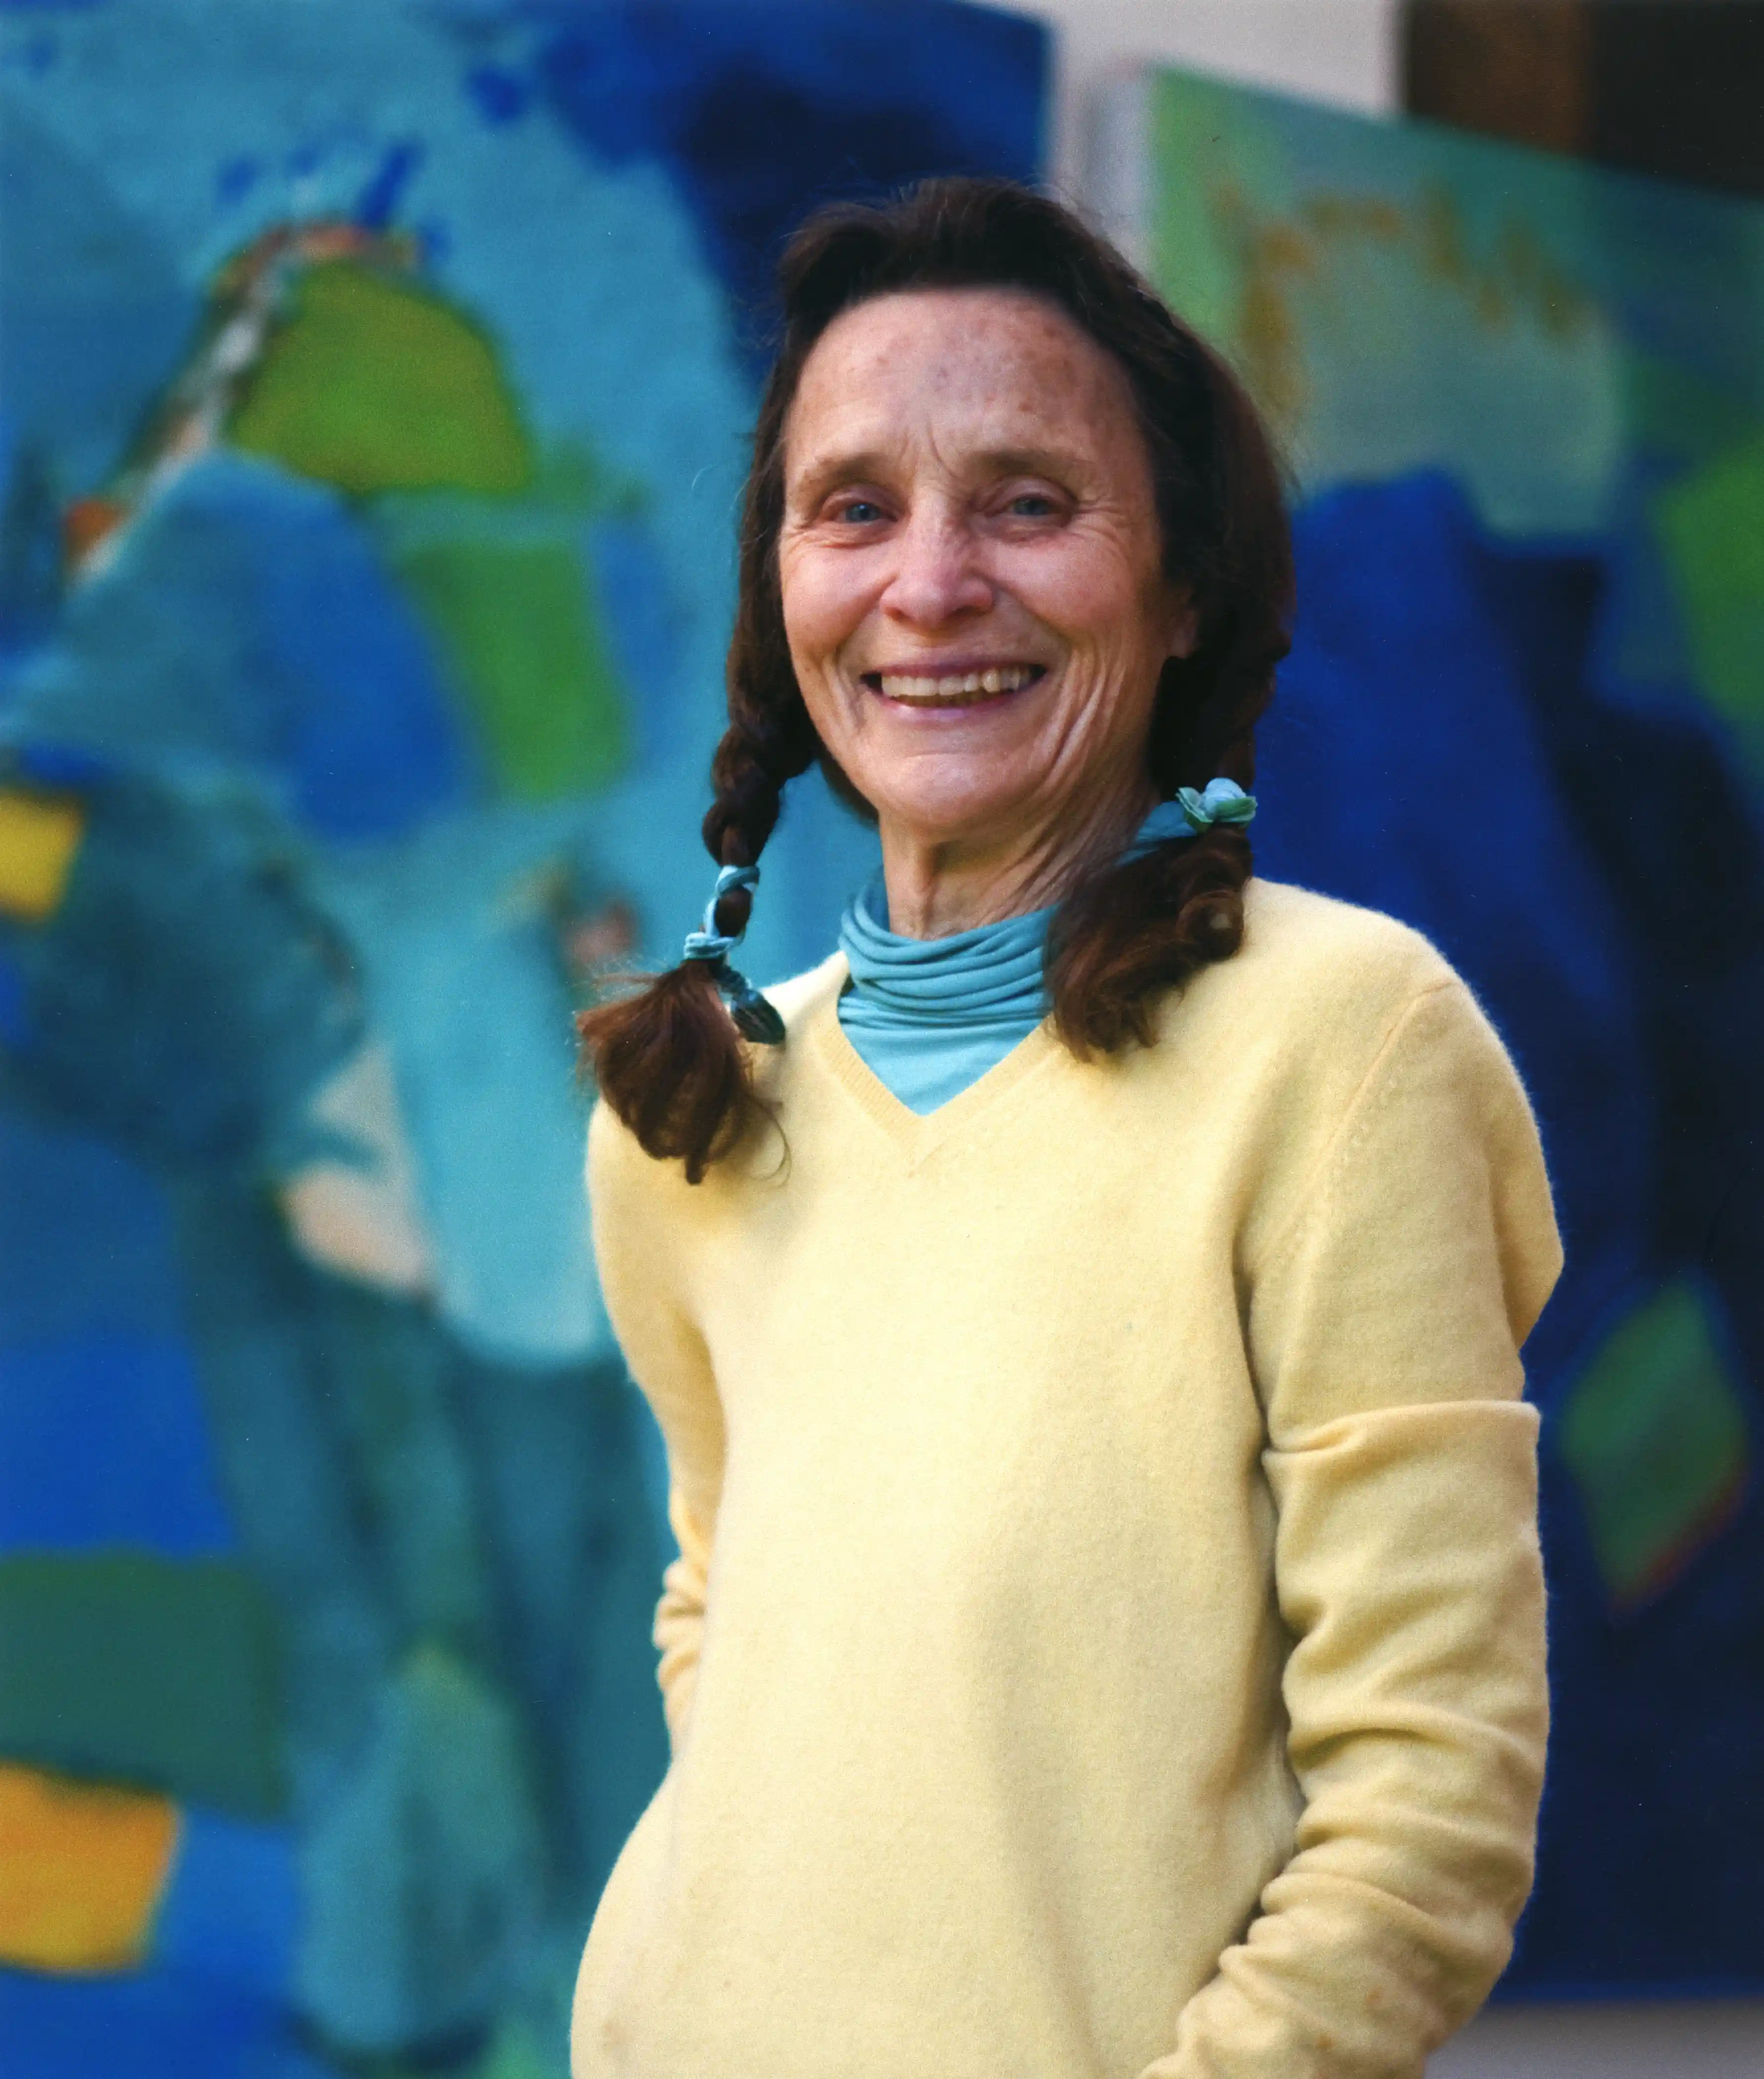 Portrait of a 67 year-old woman with a light skin tone wearing a yellow sweater over a turquoise turtleneck. She is standing infront of two abstract paintings composed of green and blue gestures.